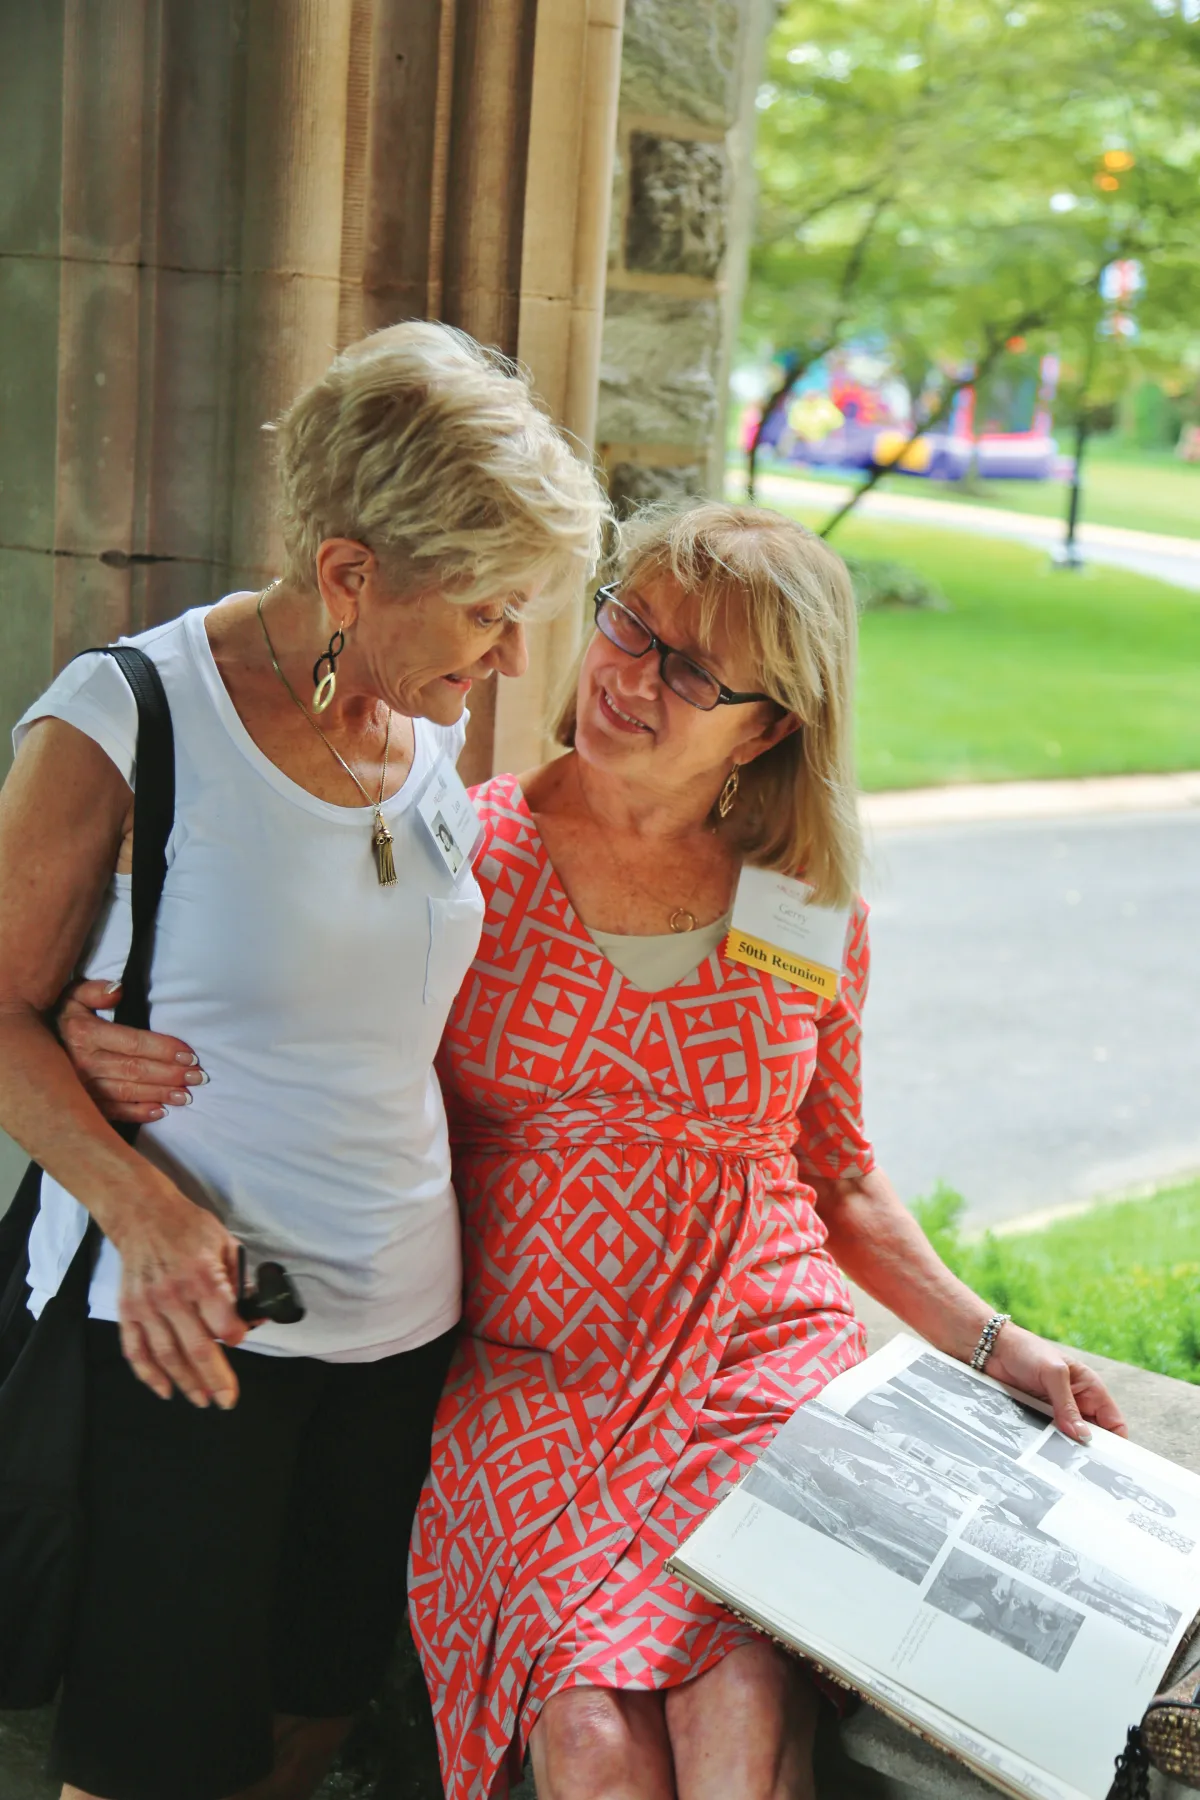 Two alumni from the Class of 1965 looking through the yearbook